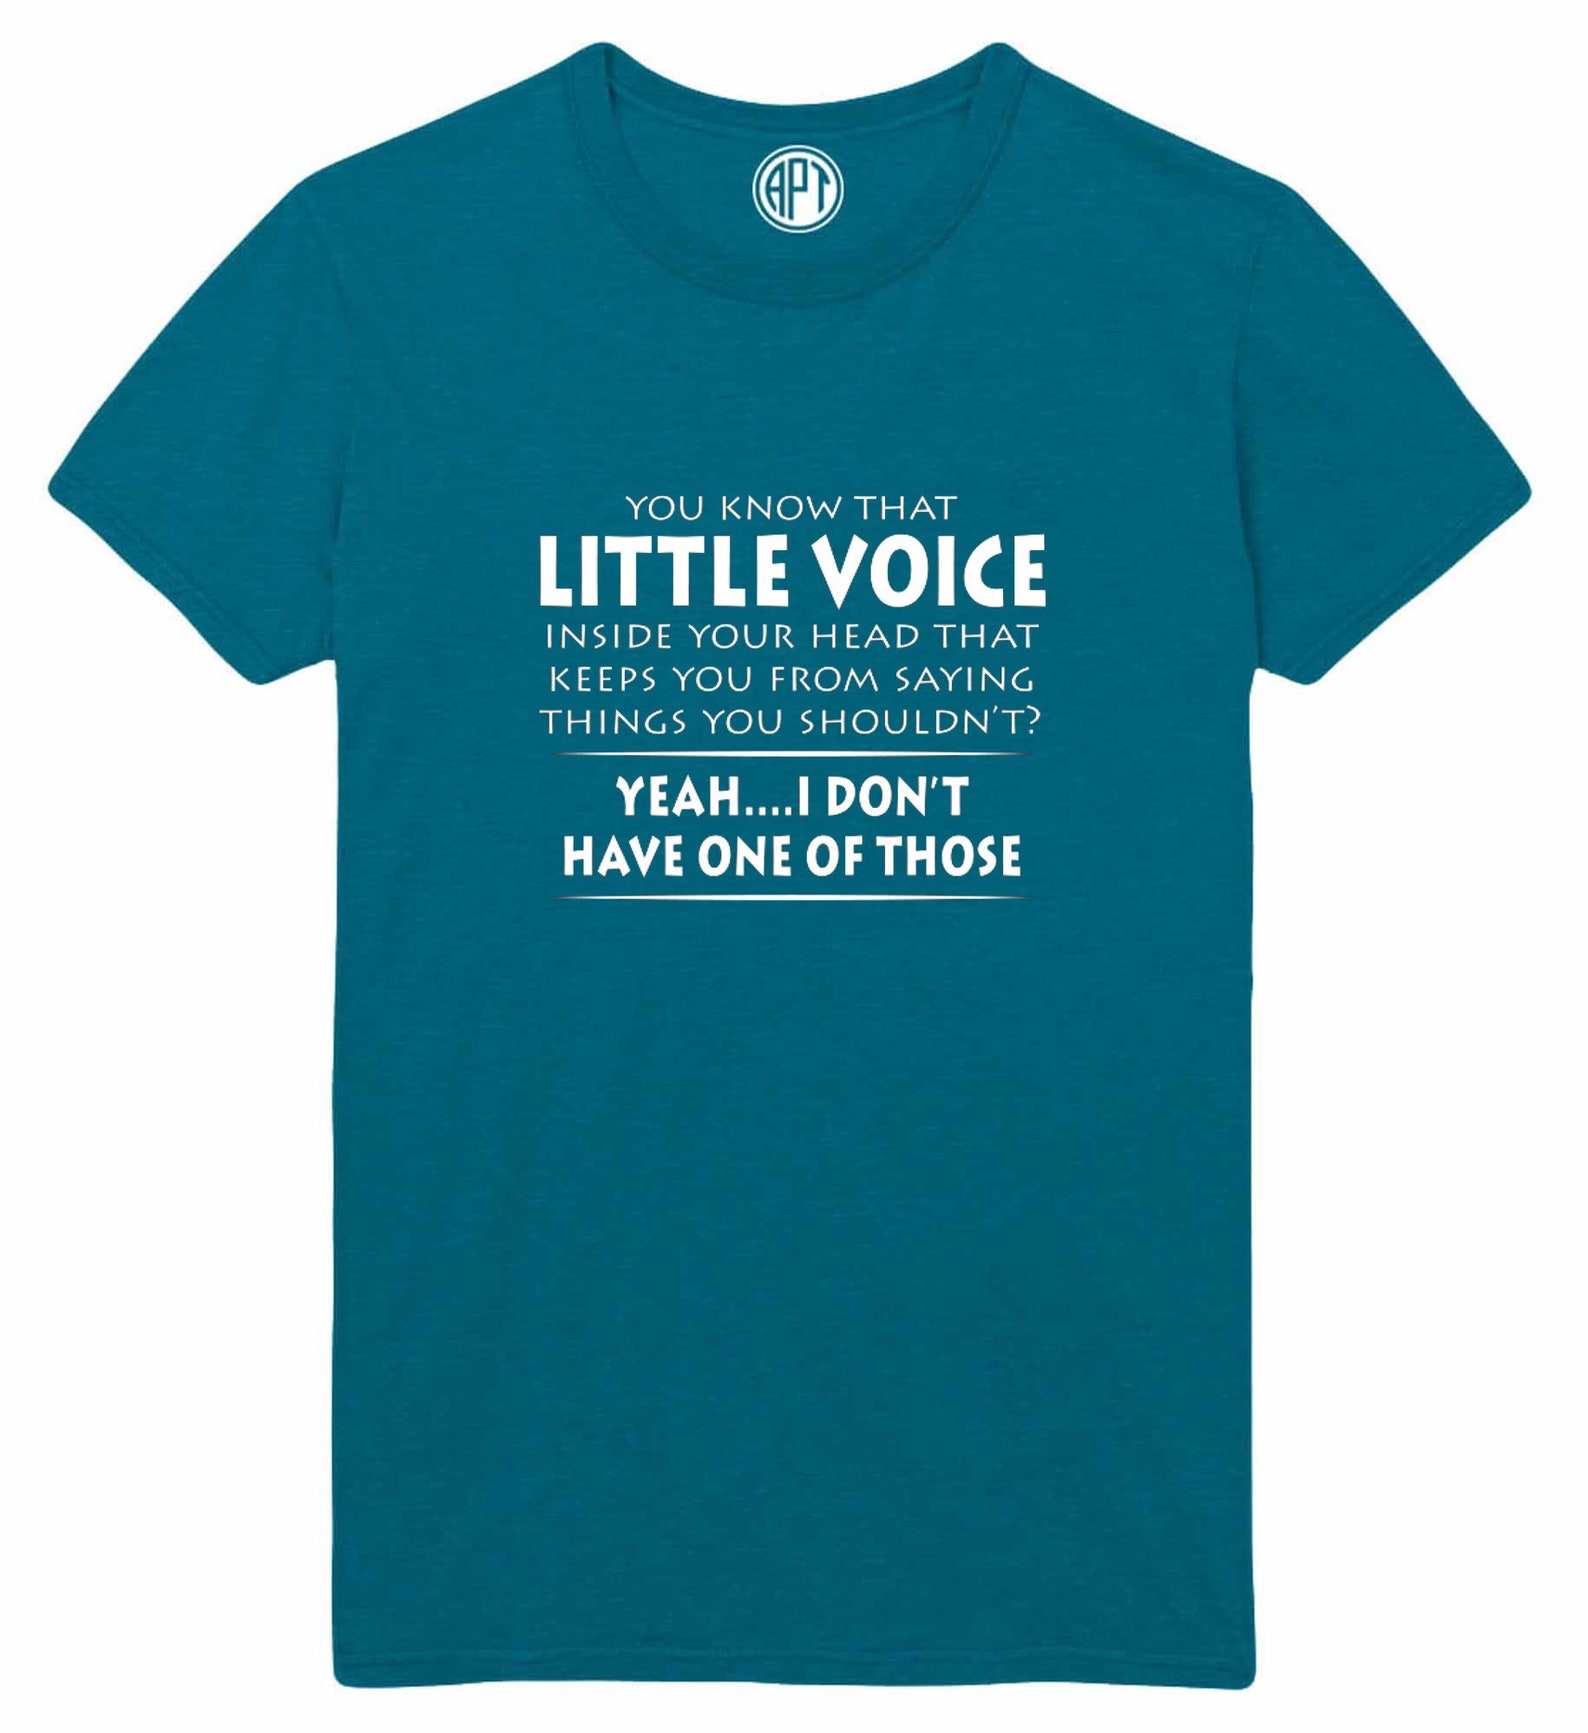 Little Voice Inside Your Head Printed Tee Shirt in Regular and - Etsy